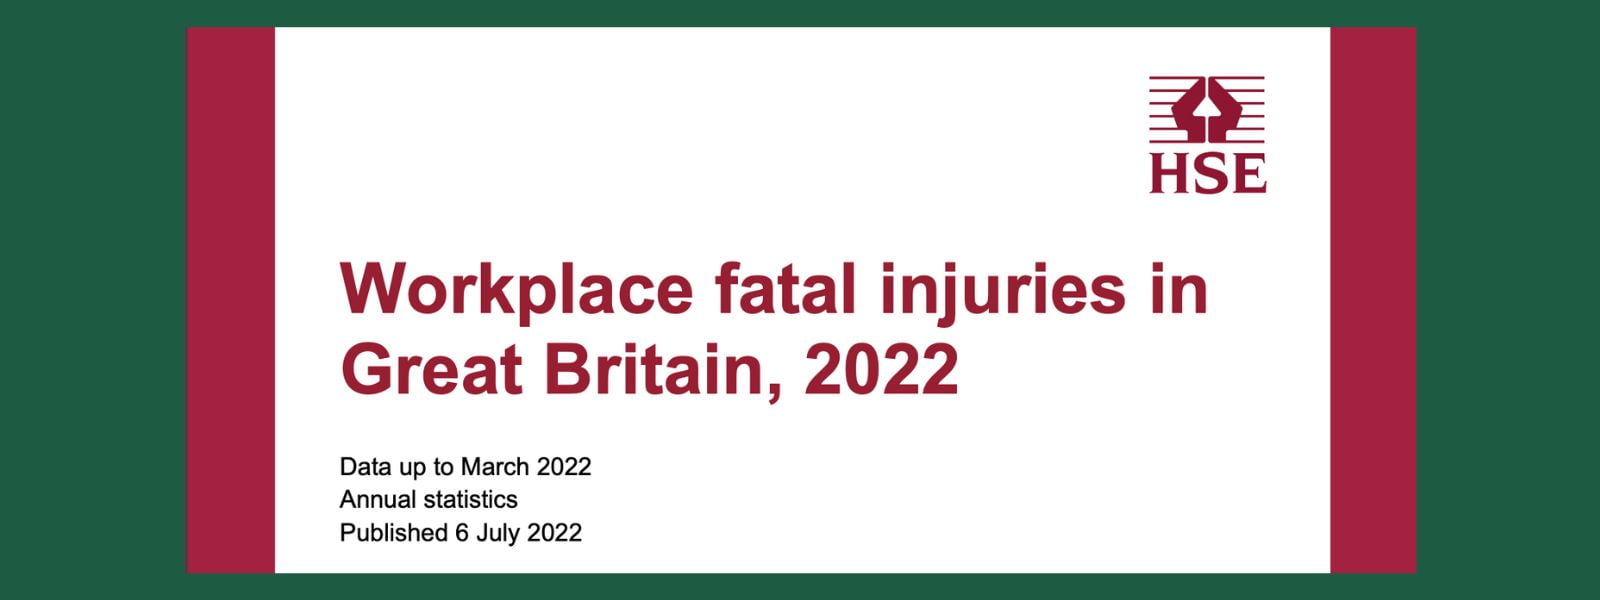 Image of HSE report Workplace fatal injuries in Great Britain 2022